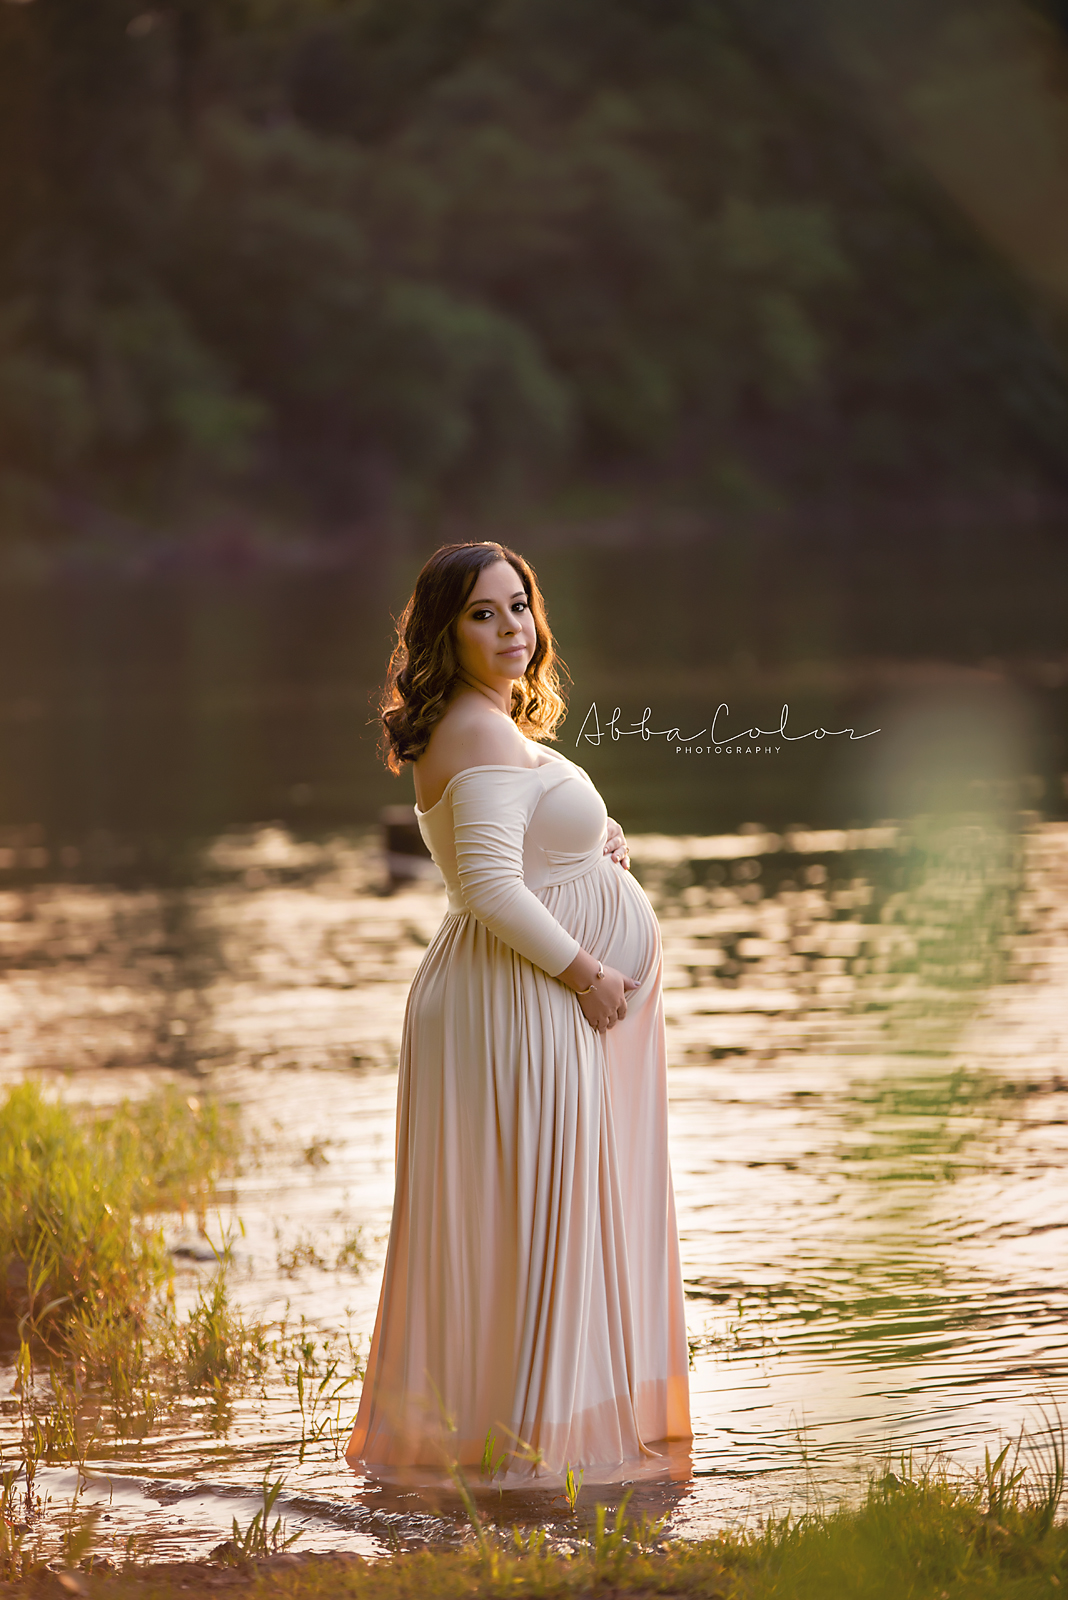 Outdoor Maternity Photoshoot idea #1 - Use Nature as a Frame image 